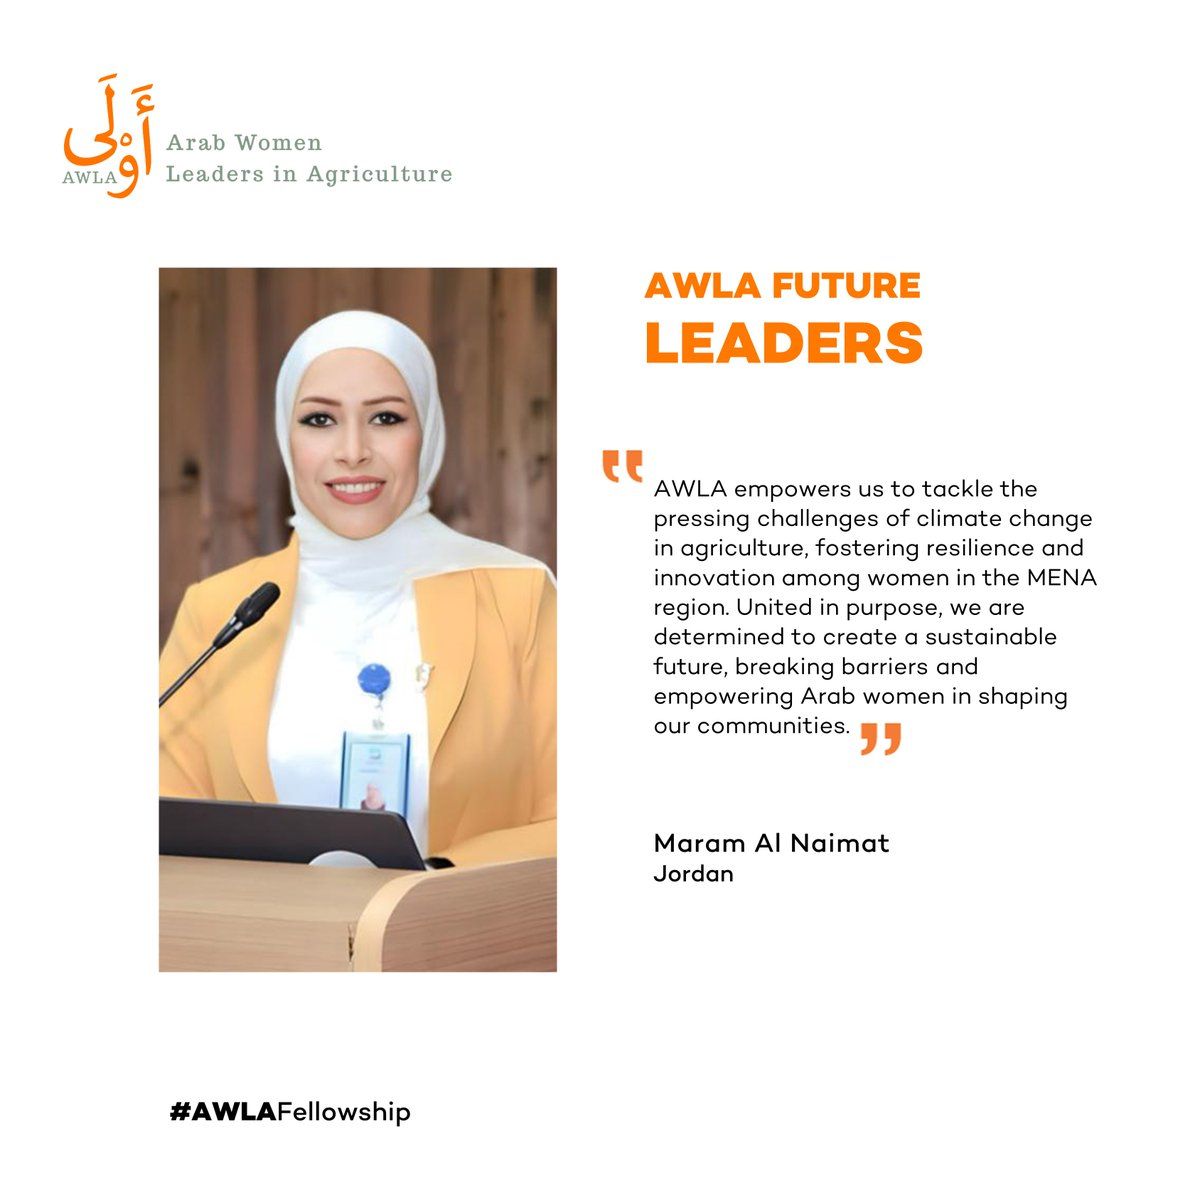 #AWLAFutureLeaders #AWLAFellowship #empowerment #inclusion #genderequality #sustainableagriculture #foodsecurity #womeninscience